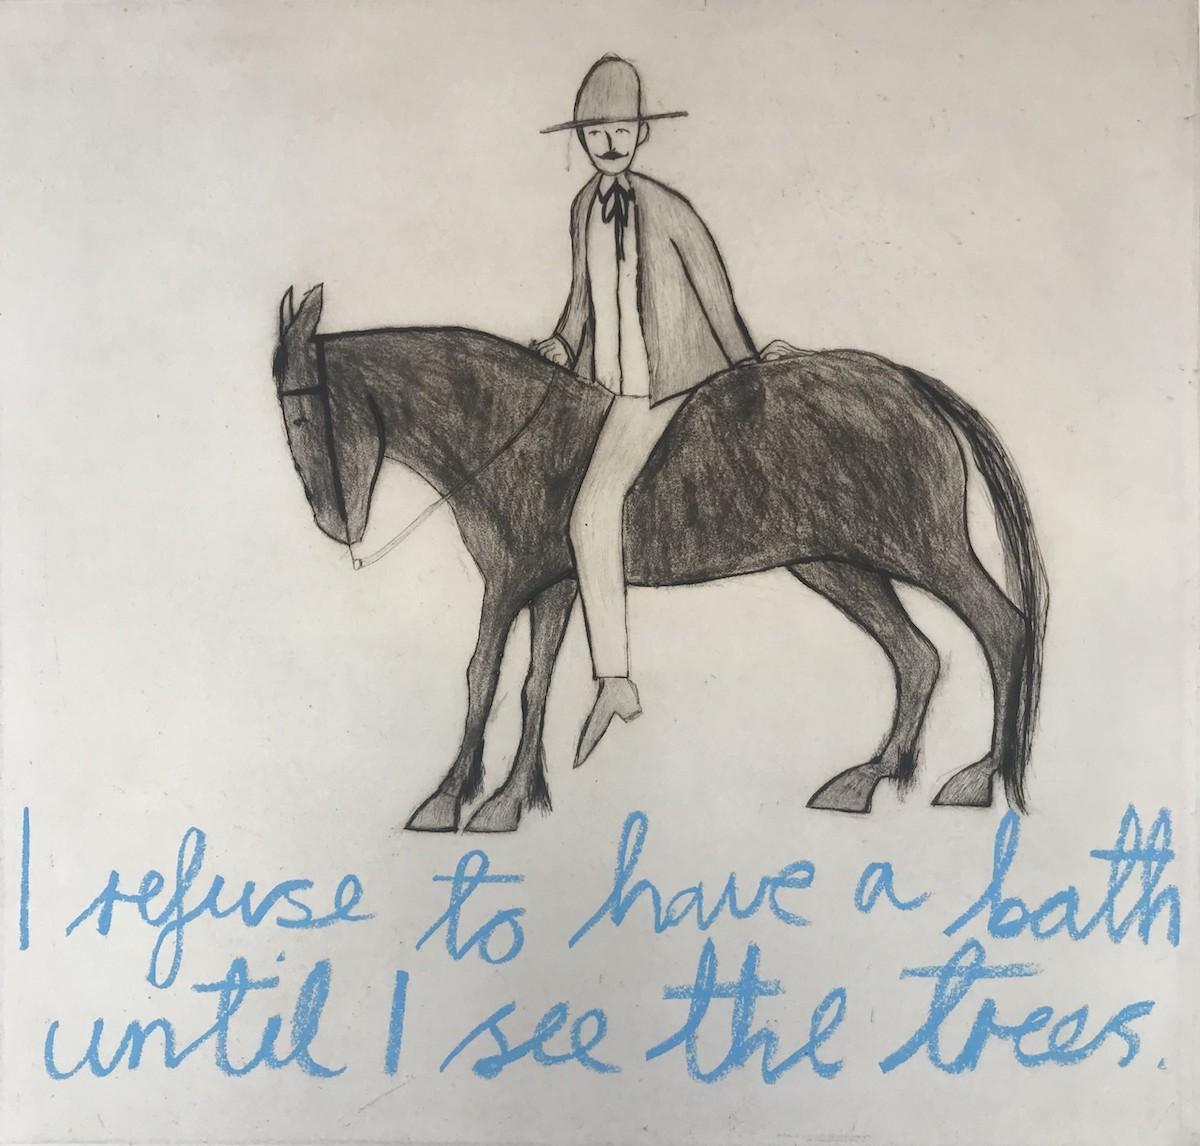 I Refuse to have a Bath until I see the Trees, Art print, Cowboy, Word art, Blue